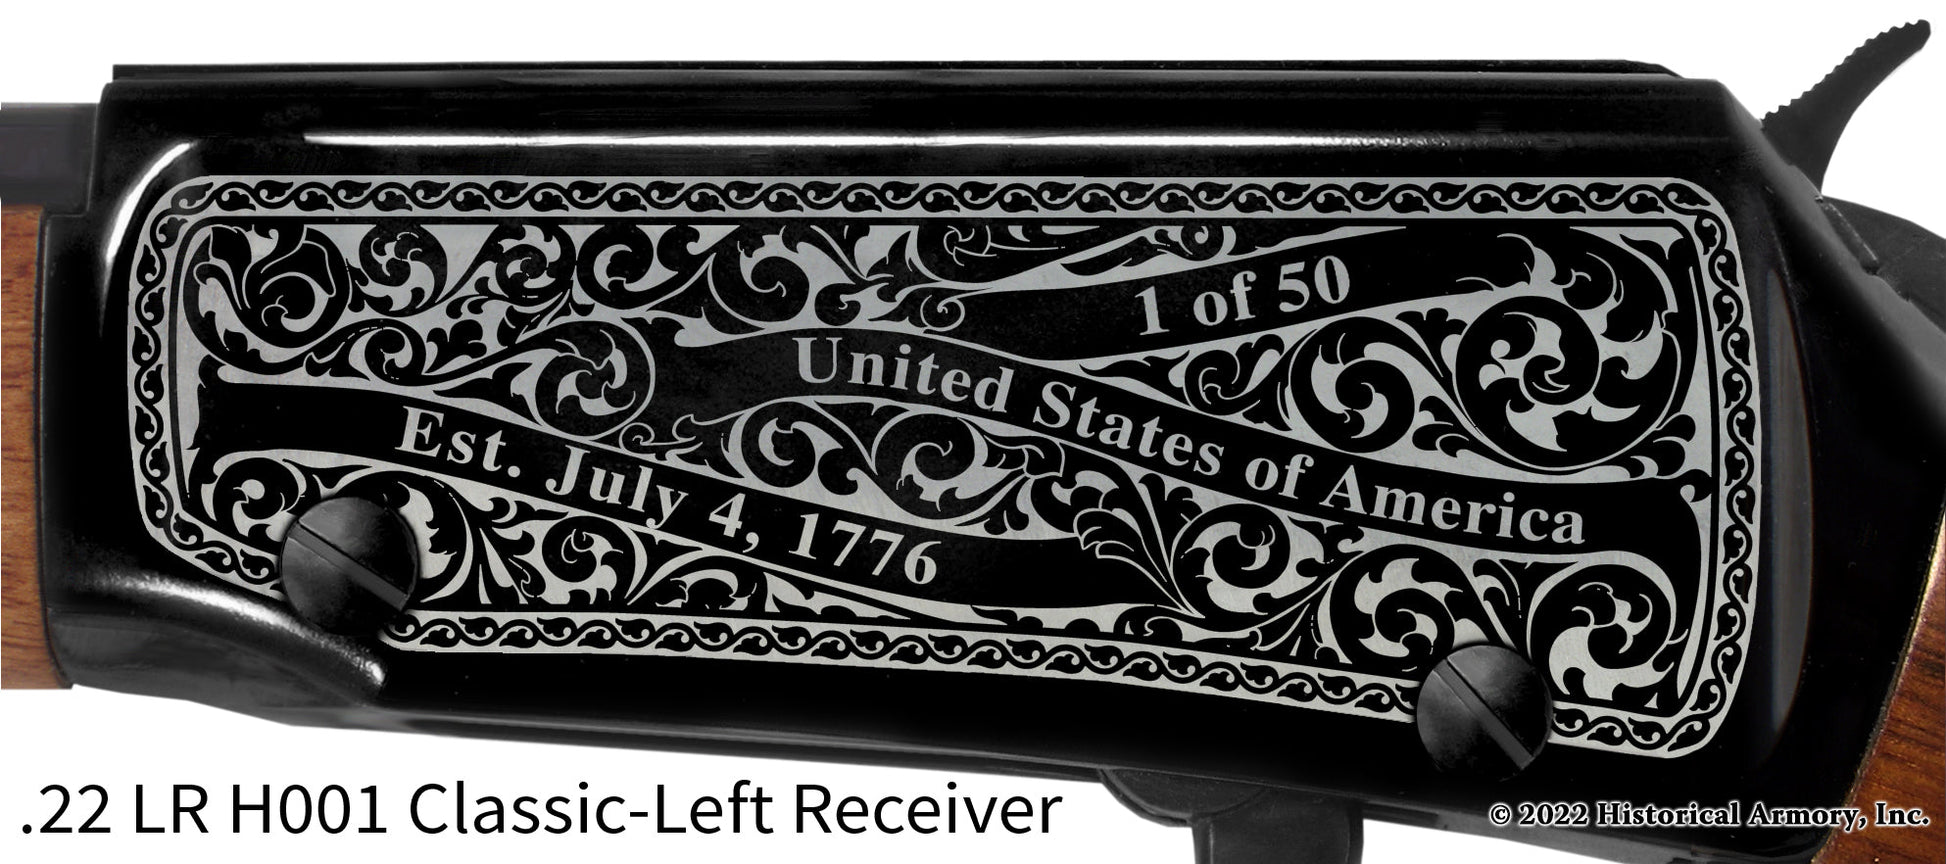 Custer County Oklahoma Engraved Henry H001 Rifle